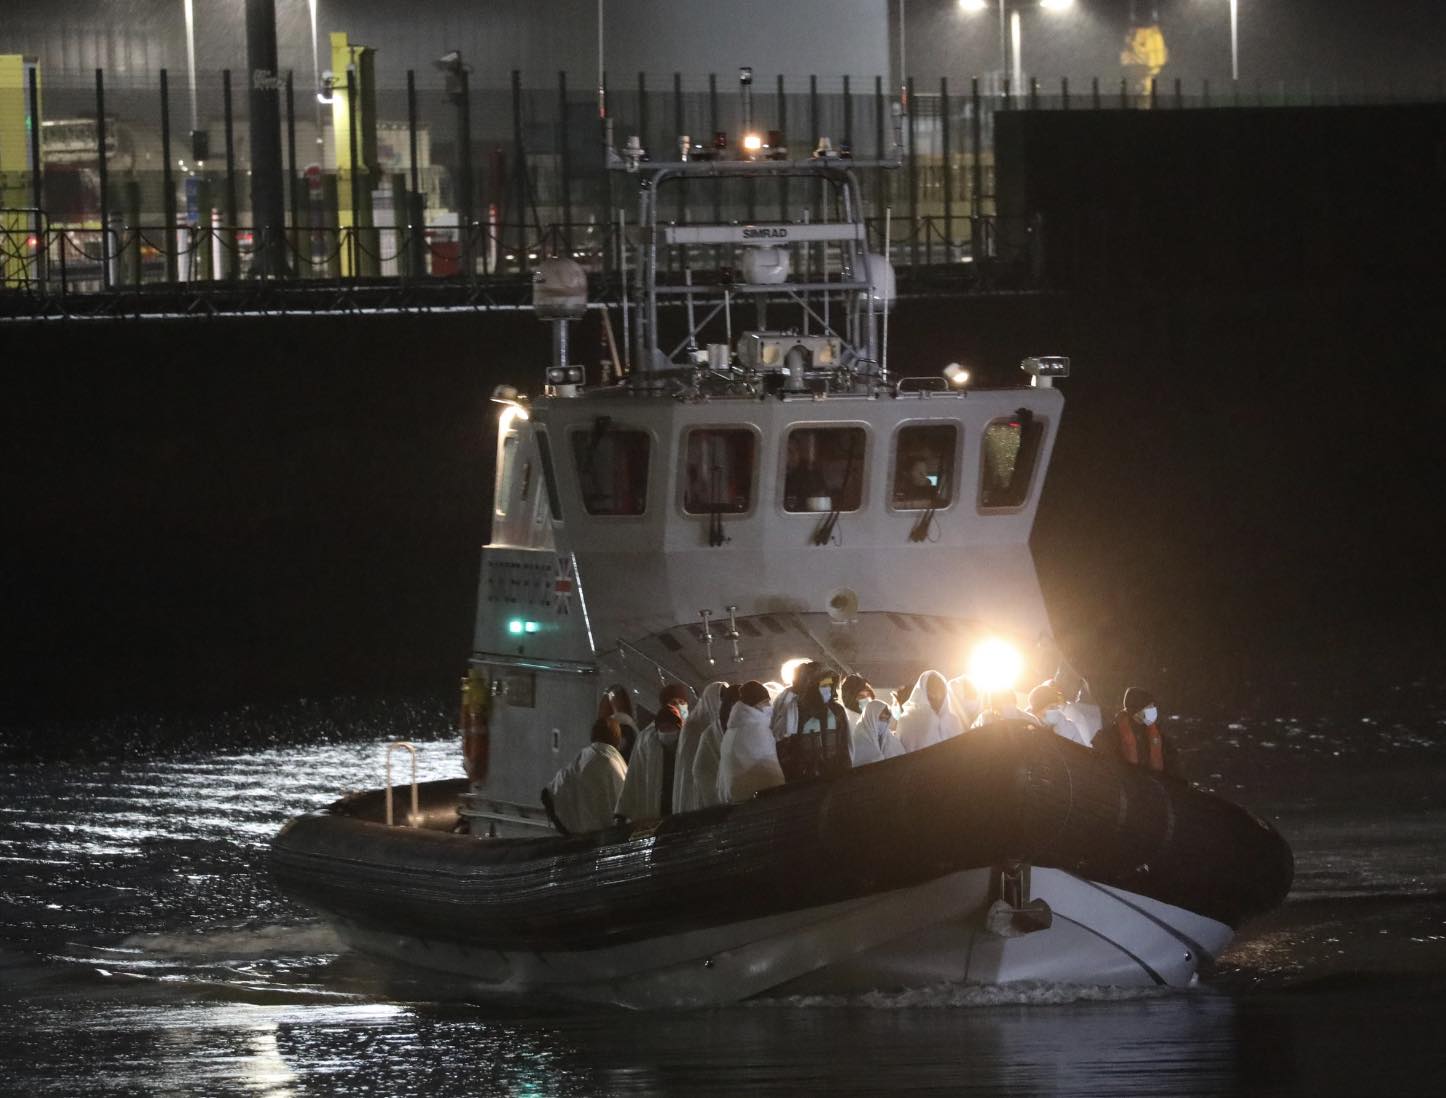 Just in time for Christmas: Young children and a baby girl are among migrants arriving in Dover minutes before midnight after crossing the channel in heavy rain